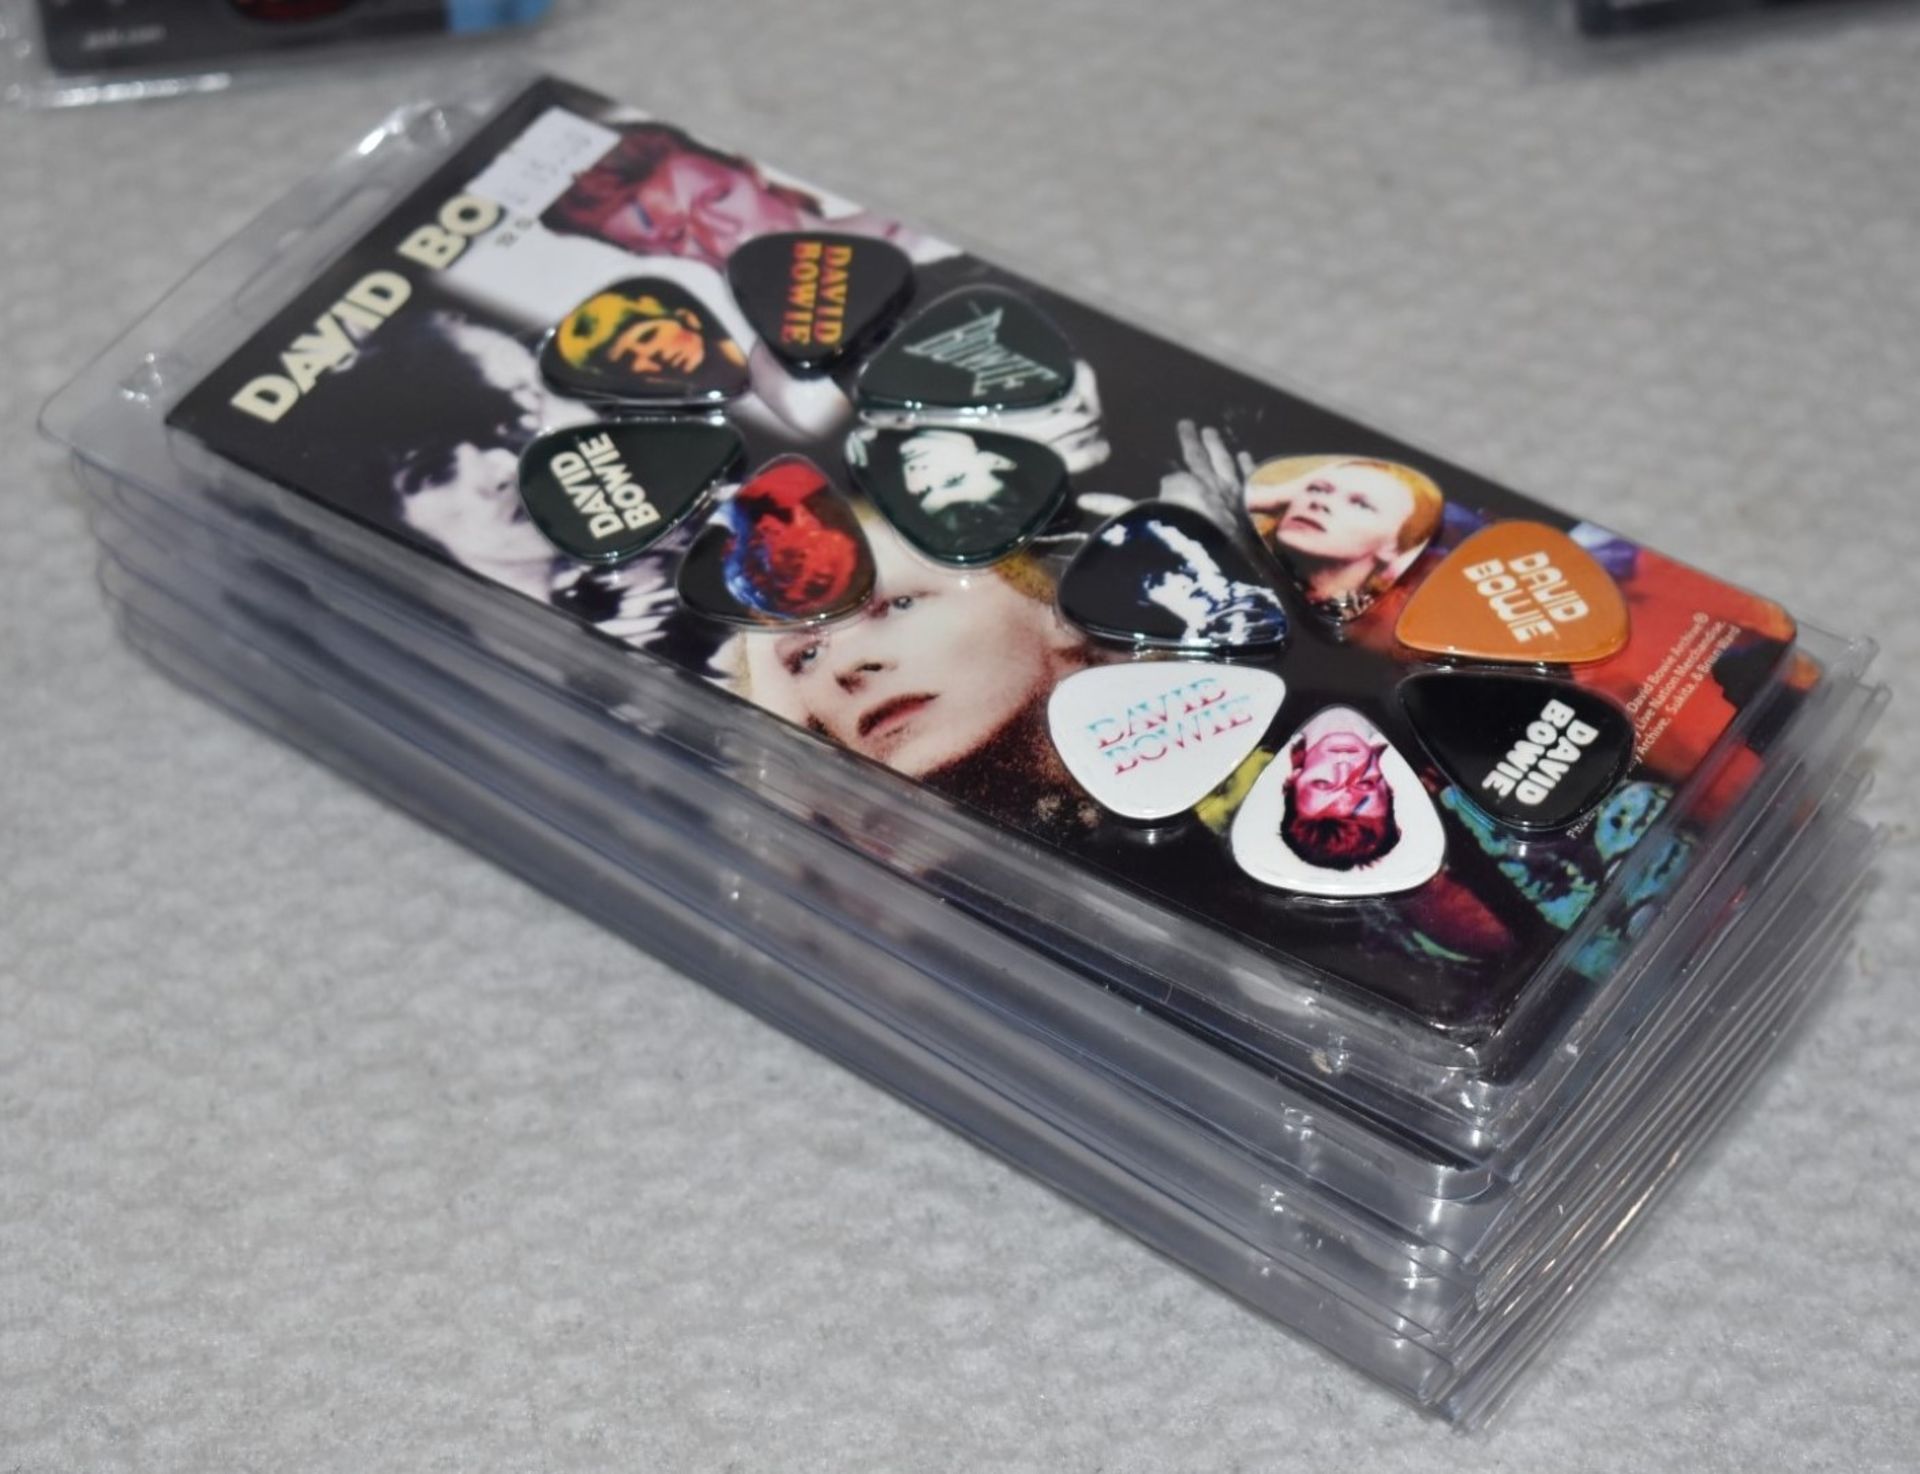 10 x David Bowie Guitar Pick Multipacks By Perri's - 6 Picks Per Pack - Officially Licensed - Image 5 of 7